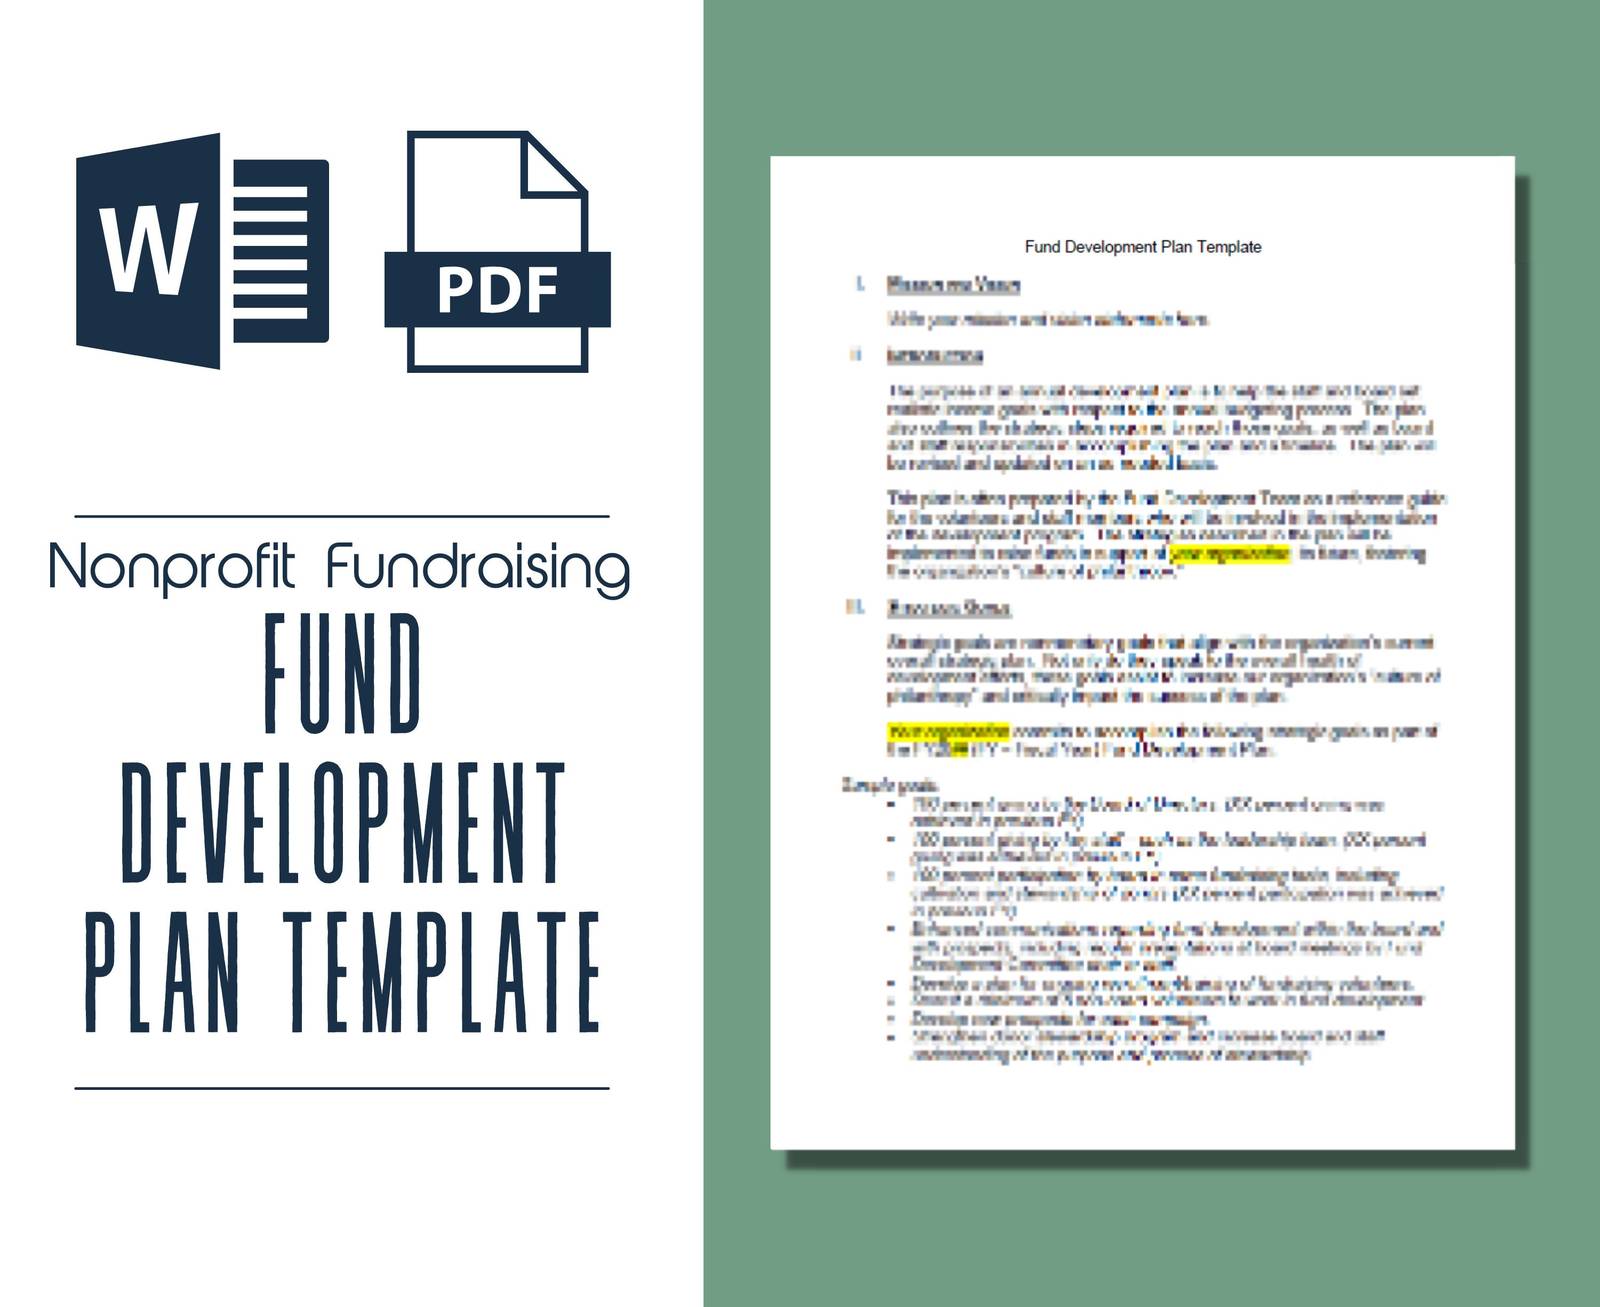 Fund Development Plan Template | Annual Fundraising Plan Template | Sample Fundr